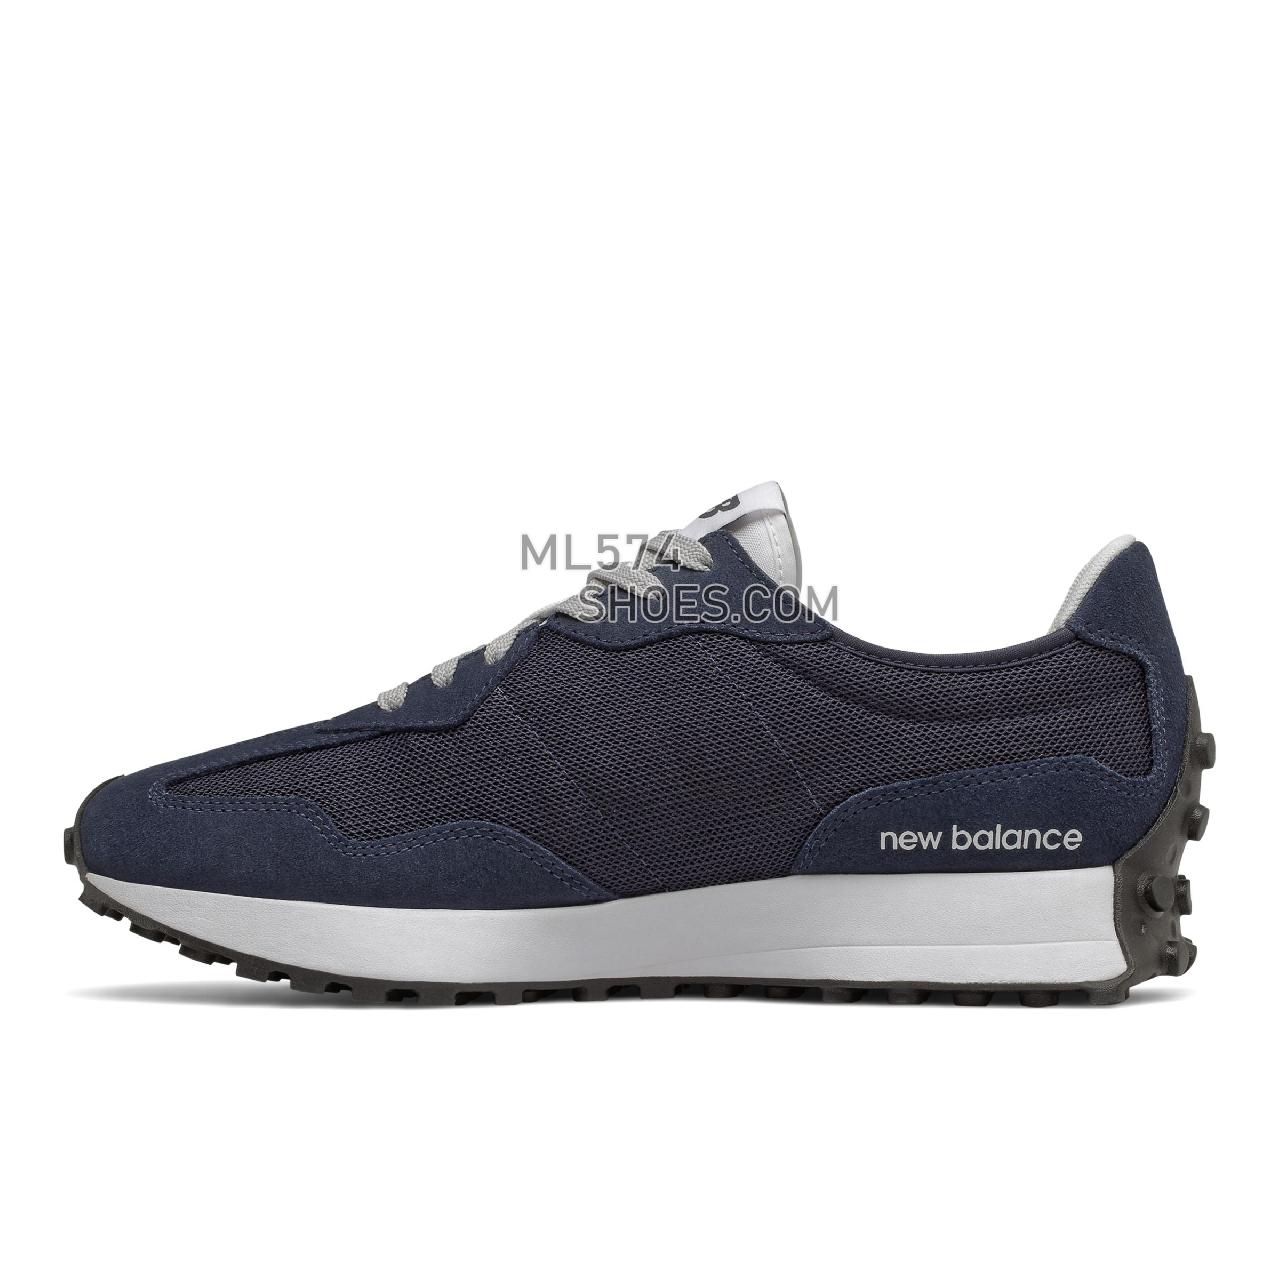 New Balance 327 - Men's Sport Style Sneakers - Natural Indigo with Metallic Silver - MS327MD1